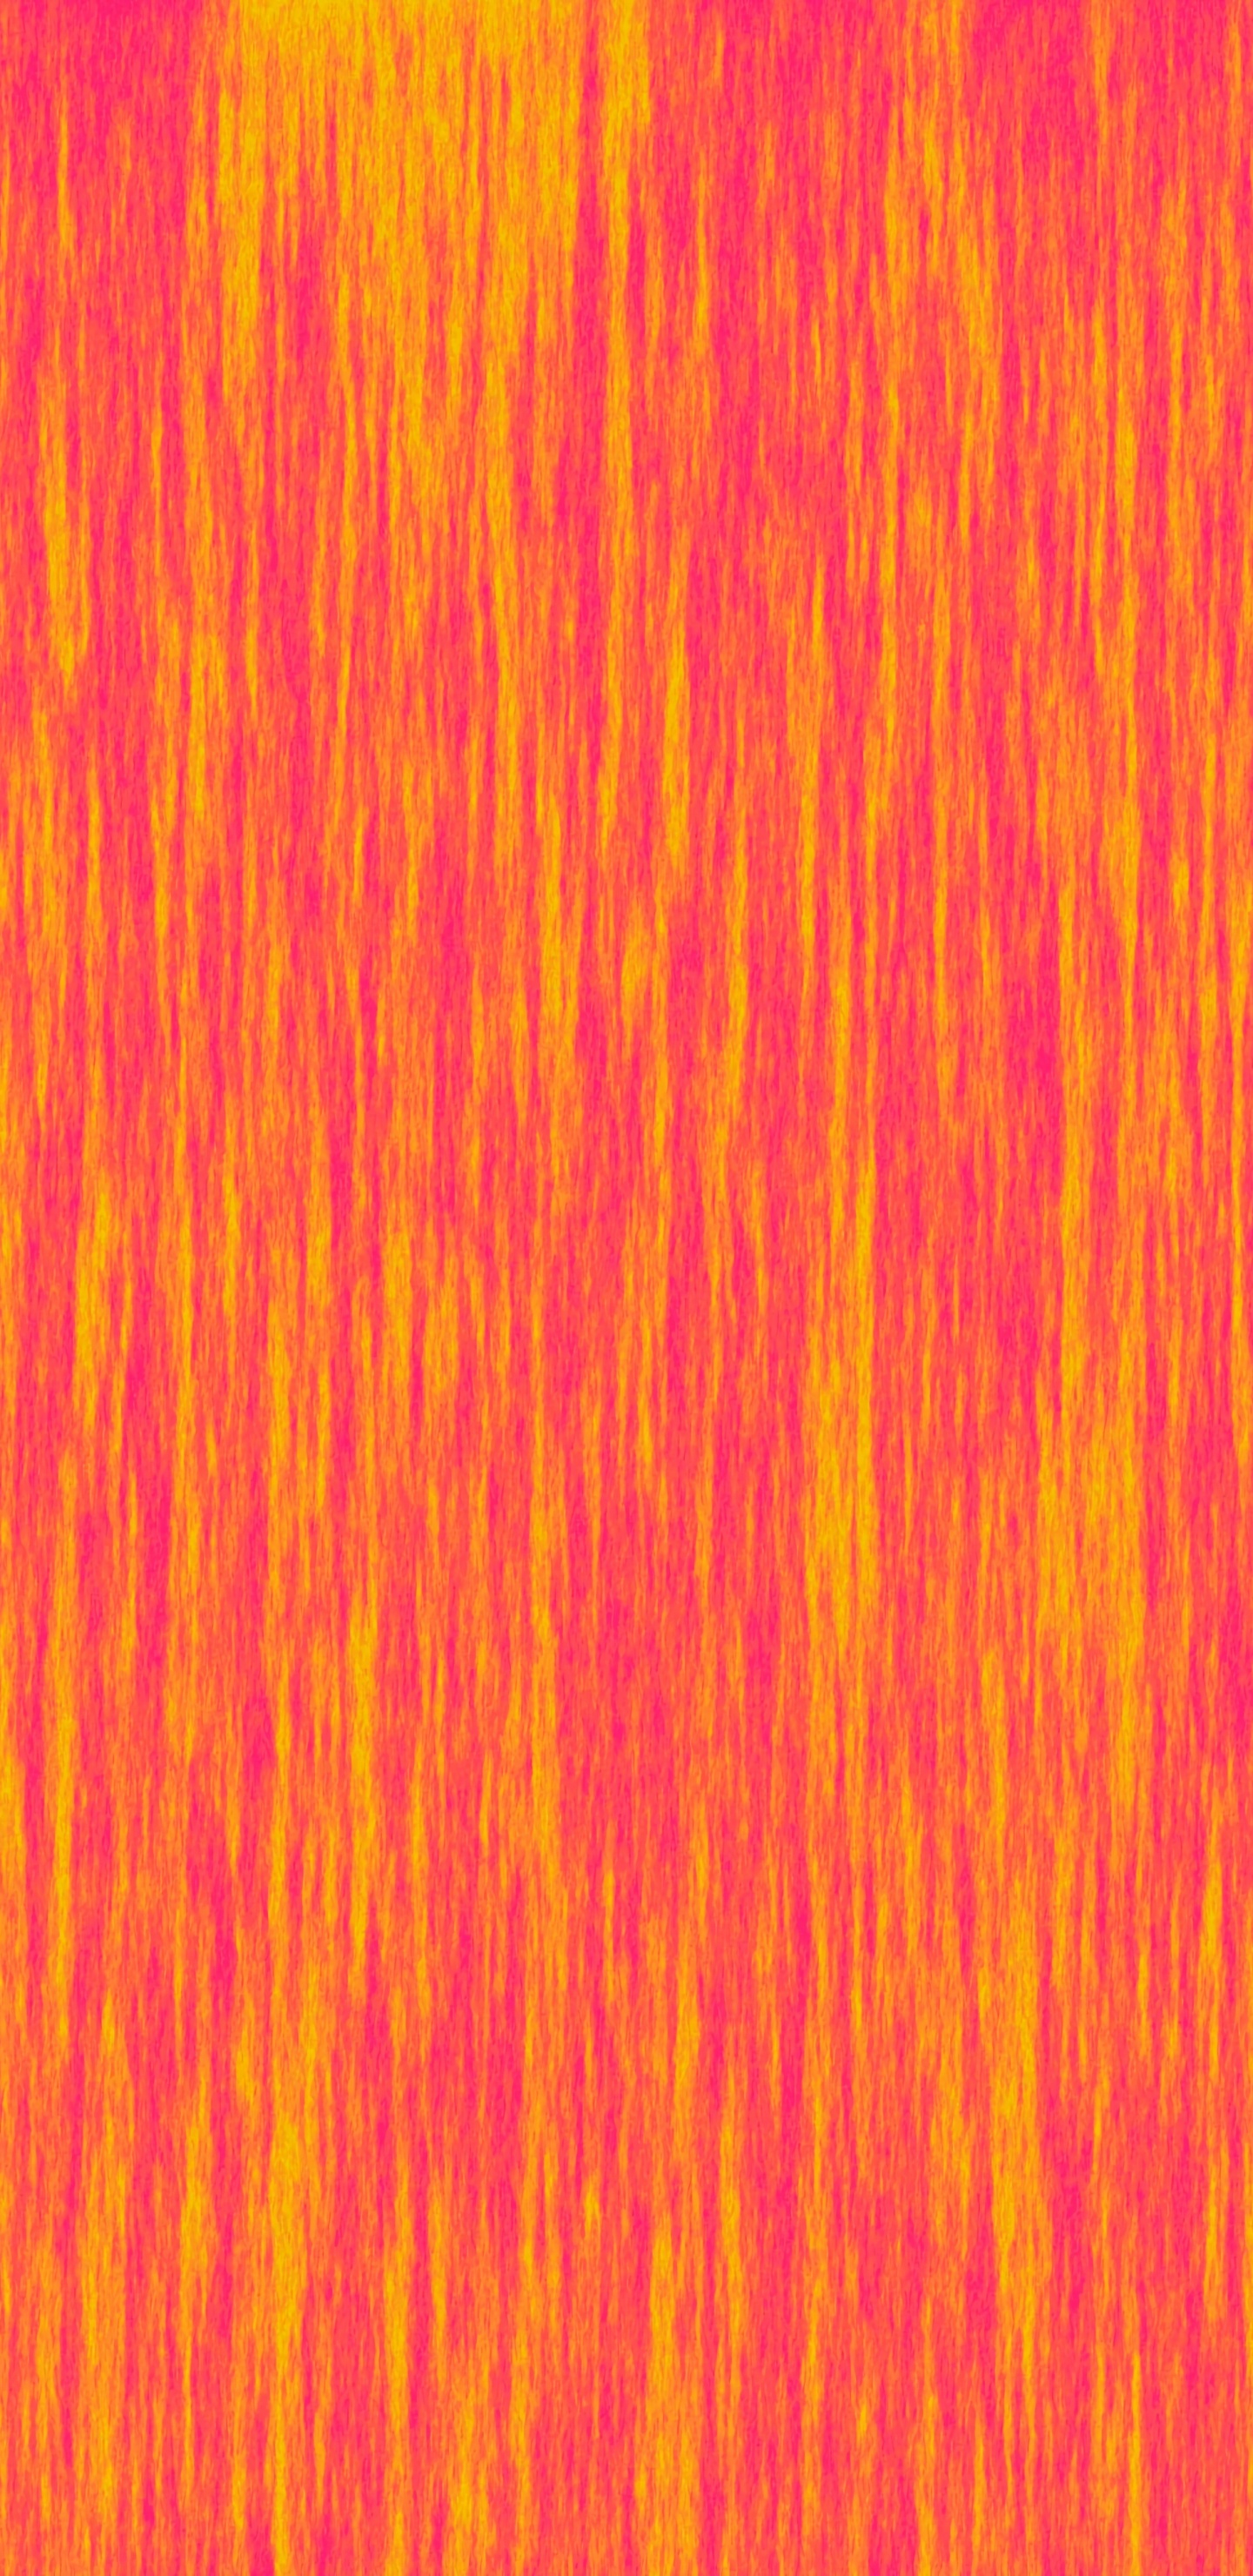 Orange and Yellow Striped Textile. Wallpaper in 1440x2960 Resolution